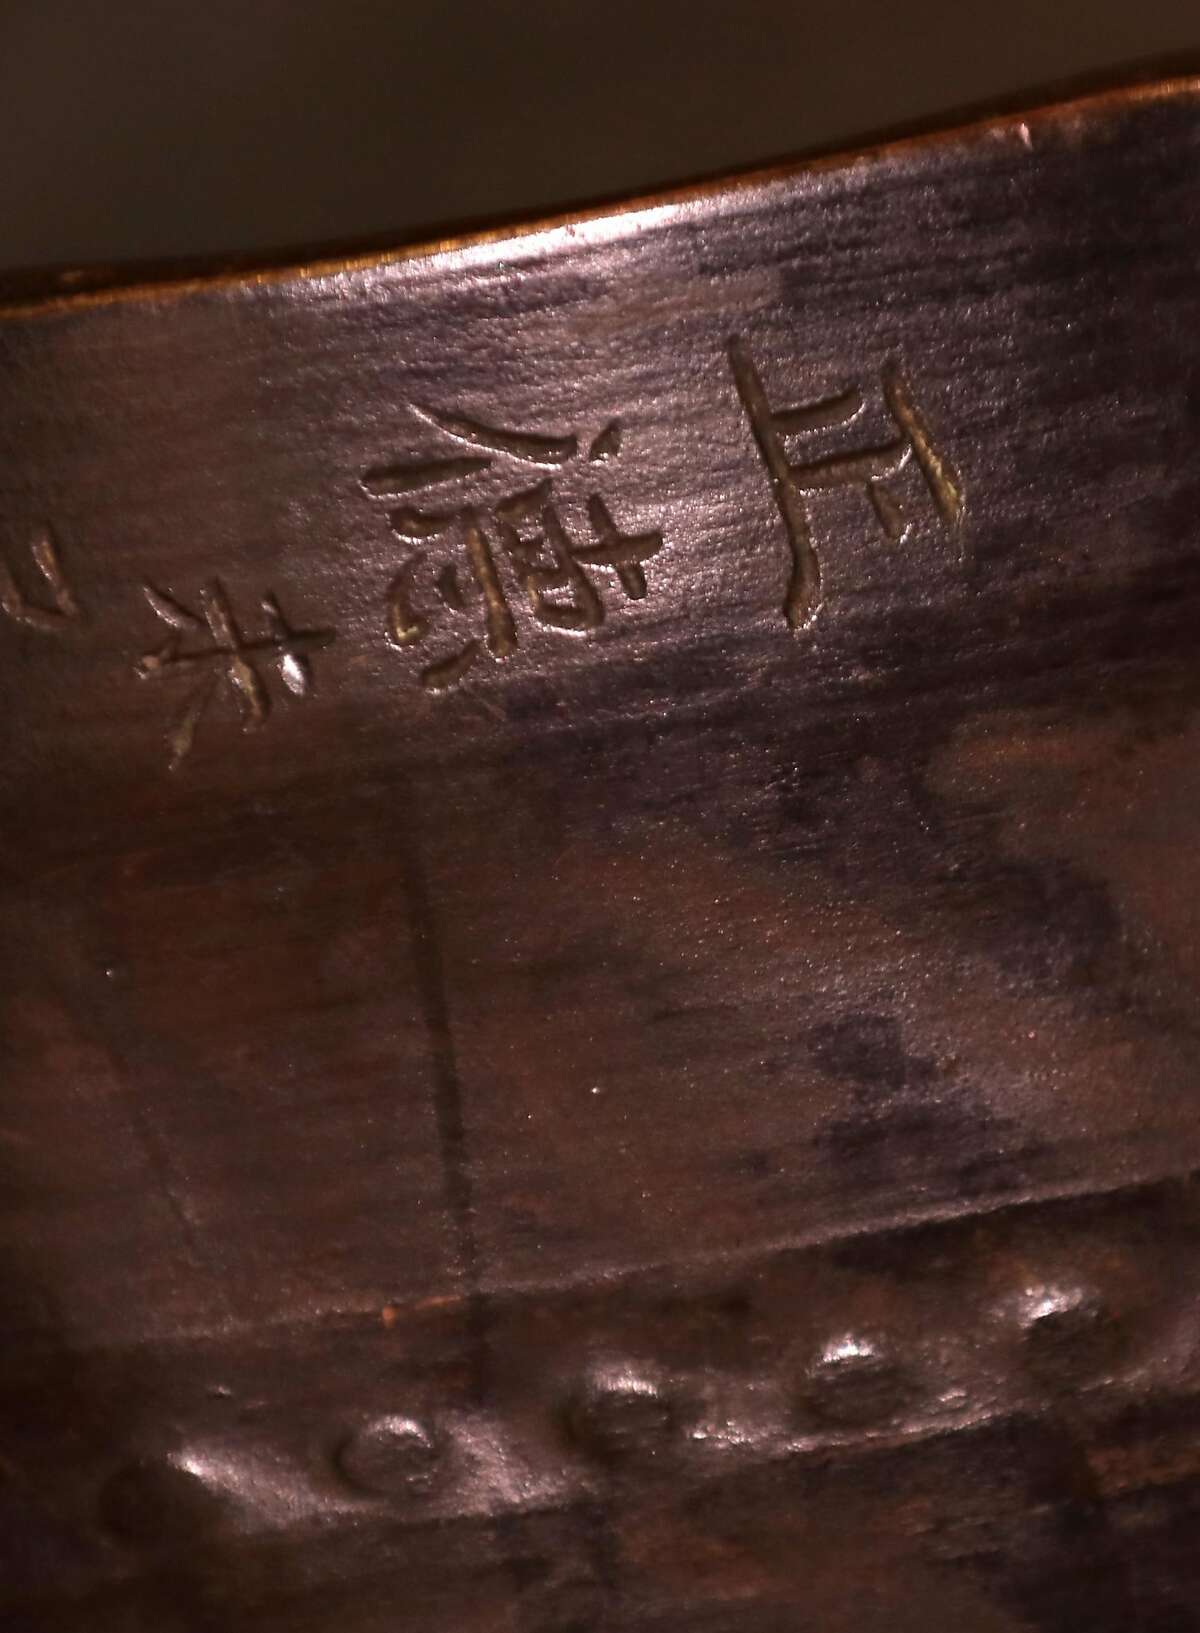 Detail of a gong used for meditation dated 1858 with writing meaning virtuous and righteous seen at the Swedenborgian church on Friday, March 6, 2020, in San Francisco, Calif. It is the 125th anniversary of national and historic landmark Swedenborgian Church.